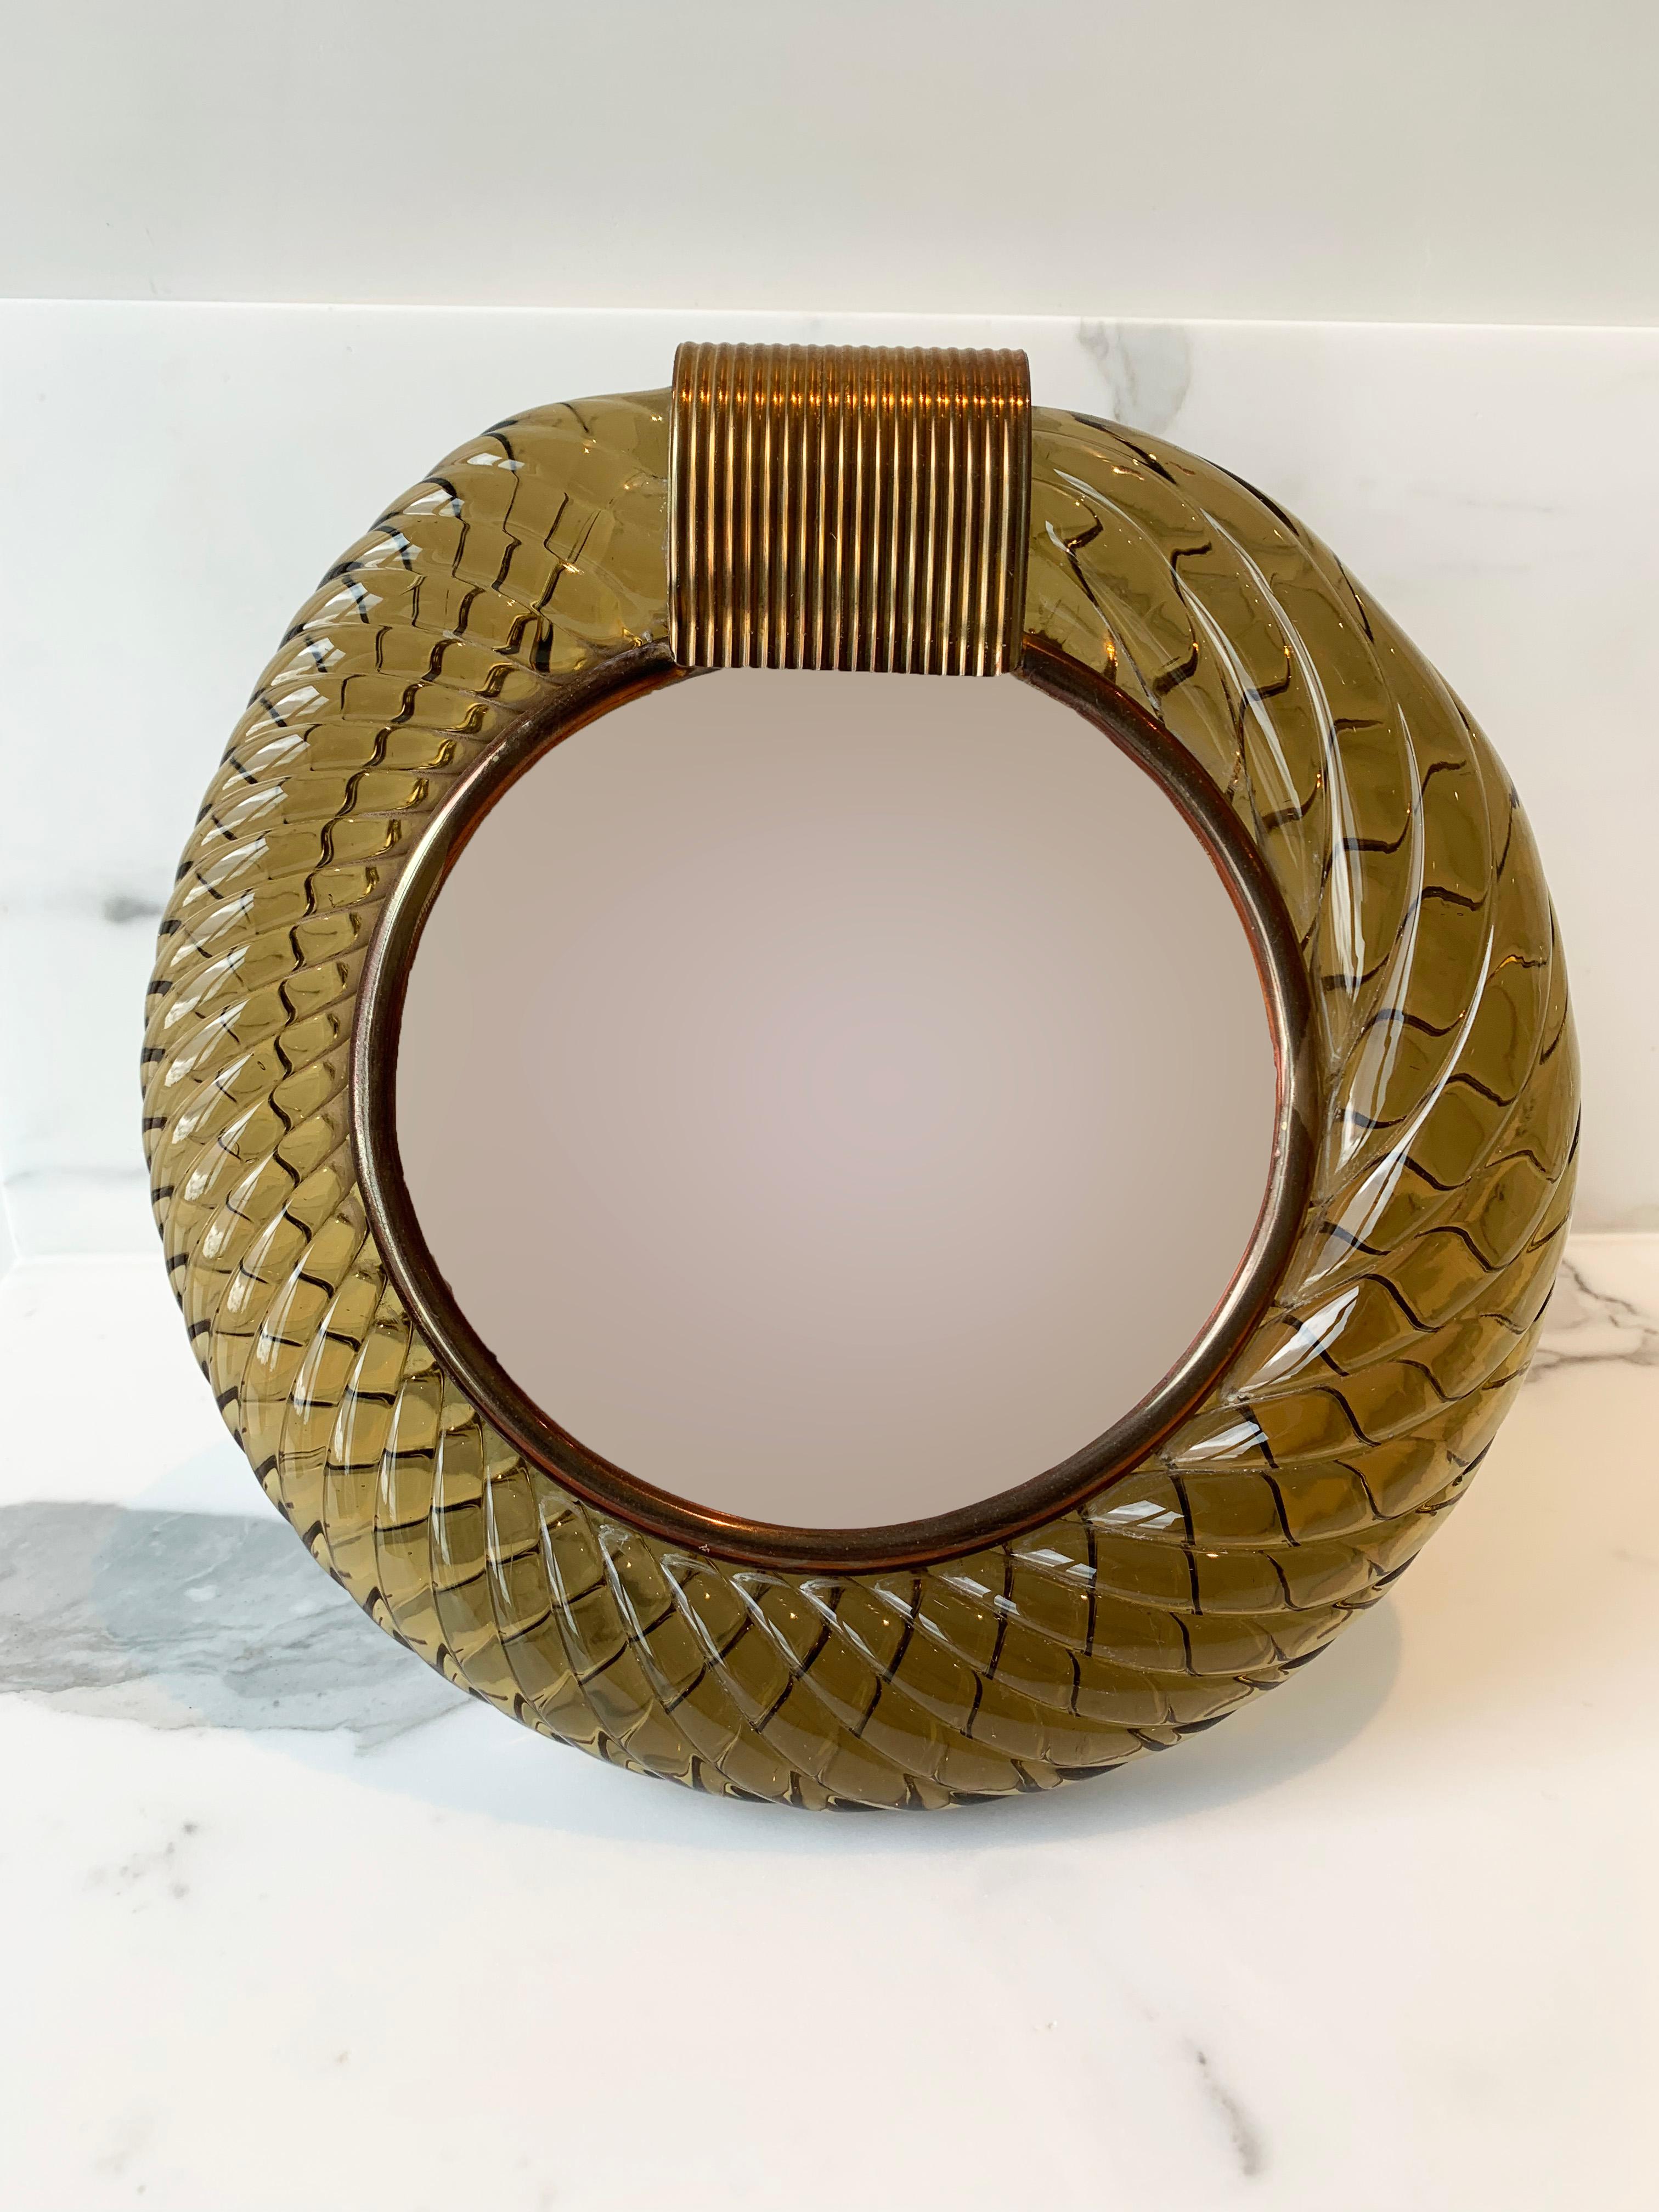 Circular Murano Glass ‘Torchon’ picture frame, by Seguso circa 1940s.

This chic and glamorous frame is comprised of a thick handmade Murano glass border; in a wonderfully deep hued amber glass with a slight tinge of bronze. The Murano glass has